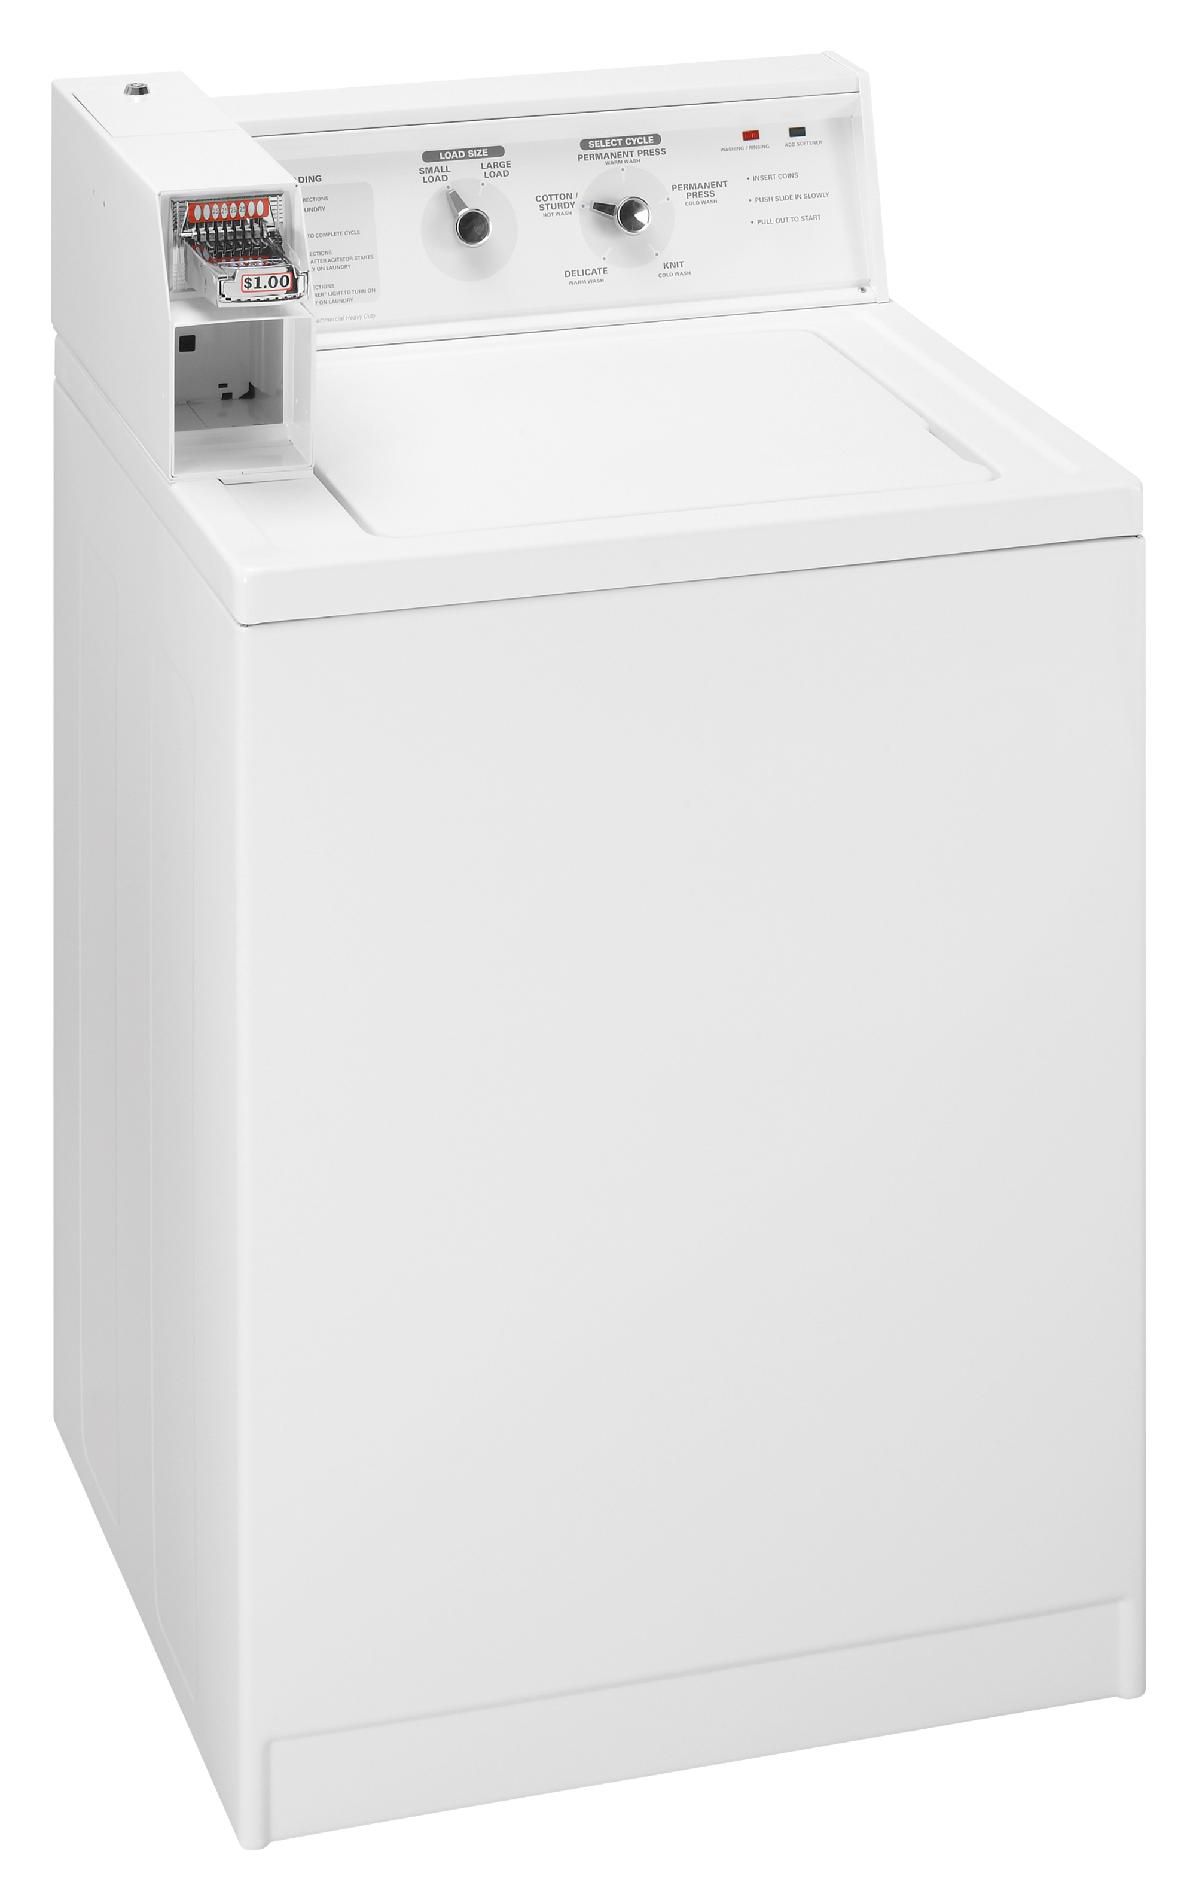 Kenmore 3.1 cu. ft. Coin-Operated Washer